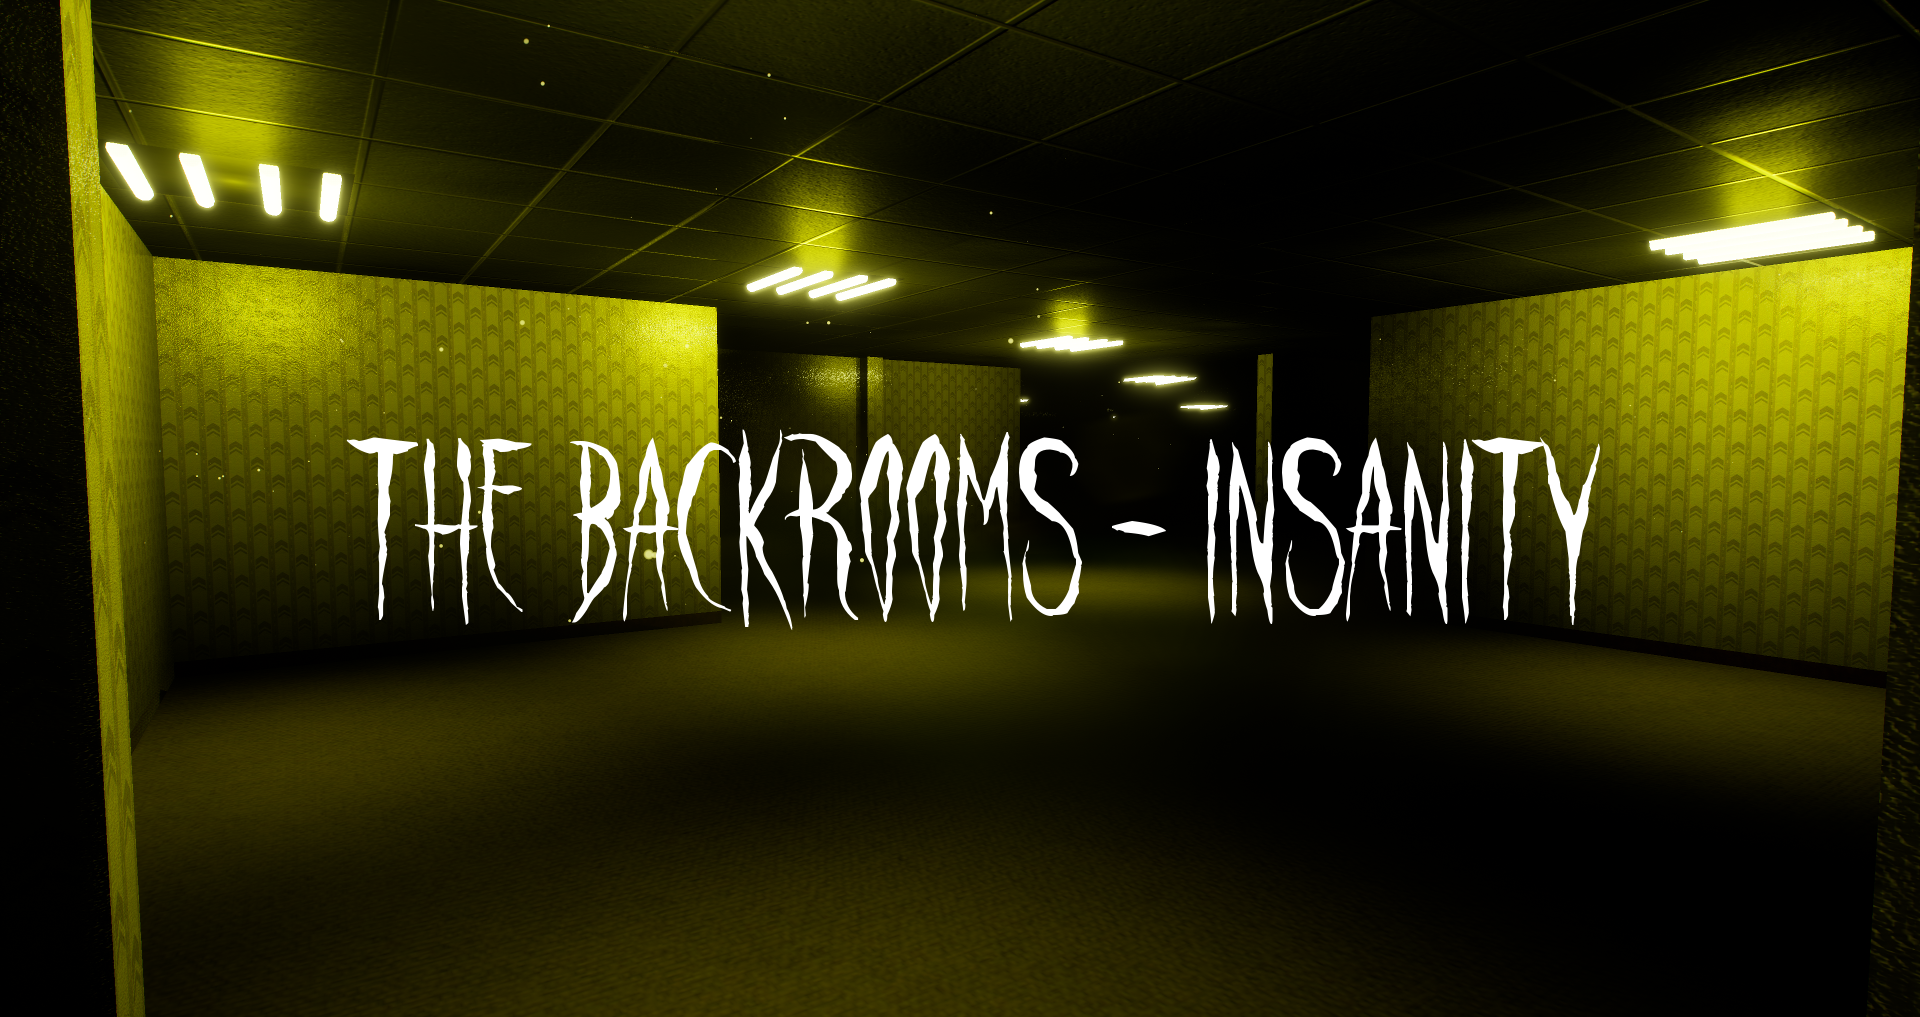 The Backrooms - Insanity